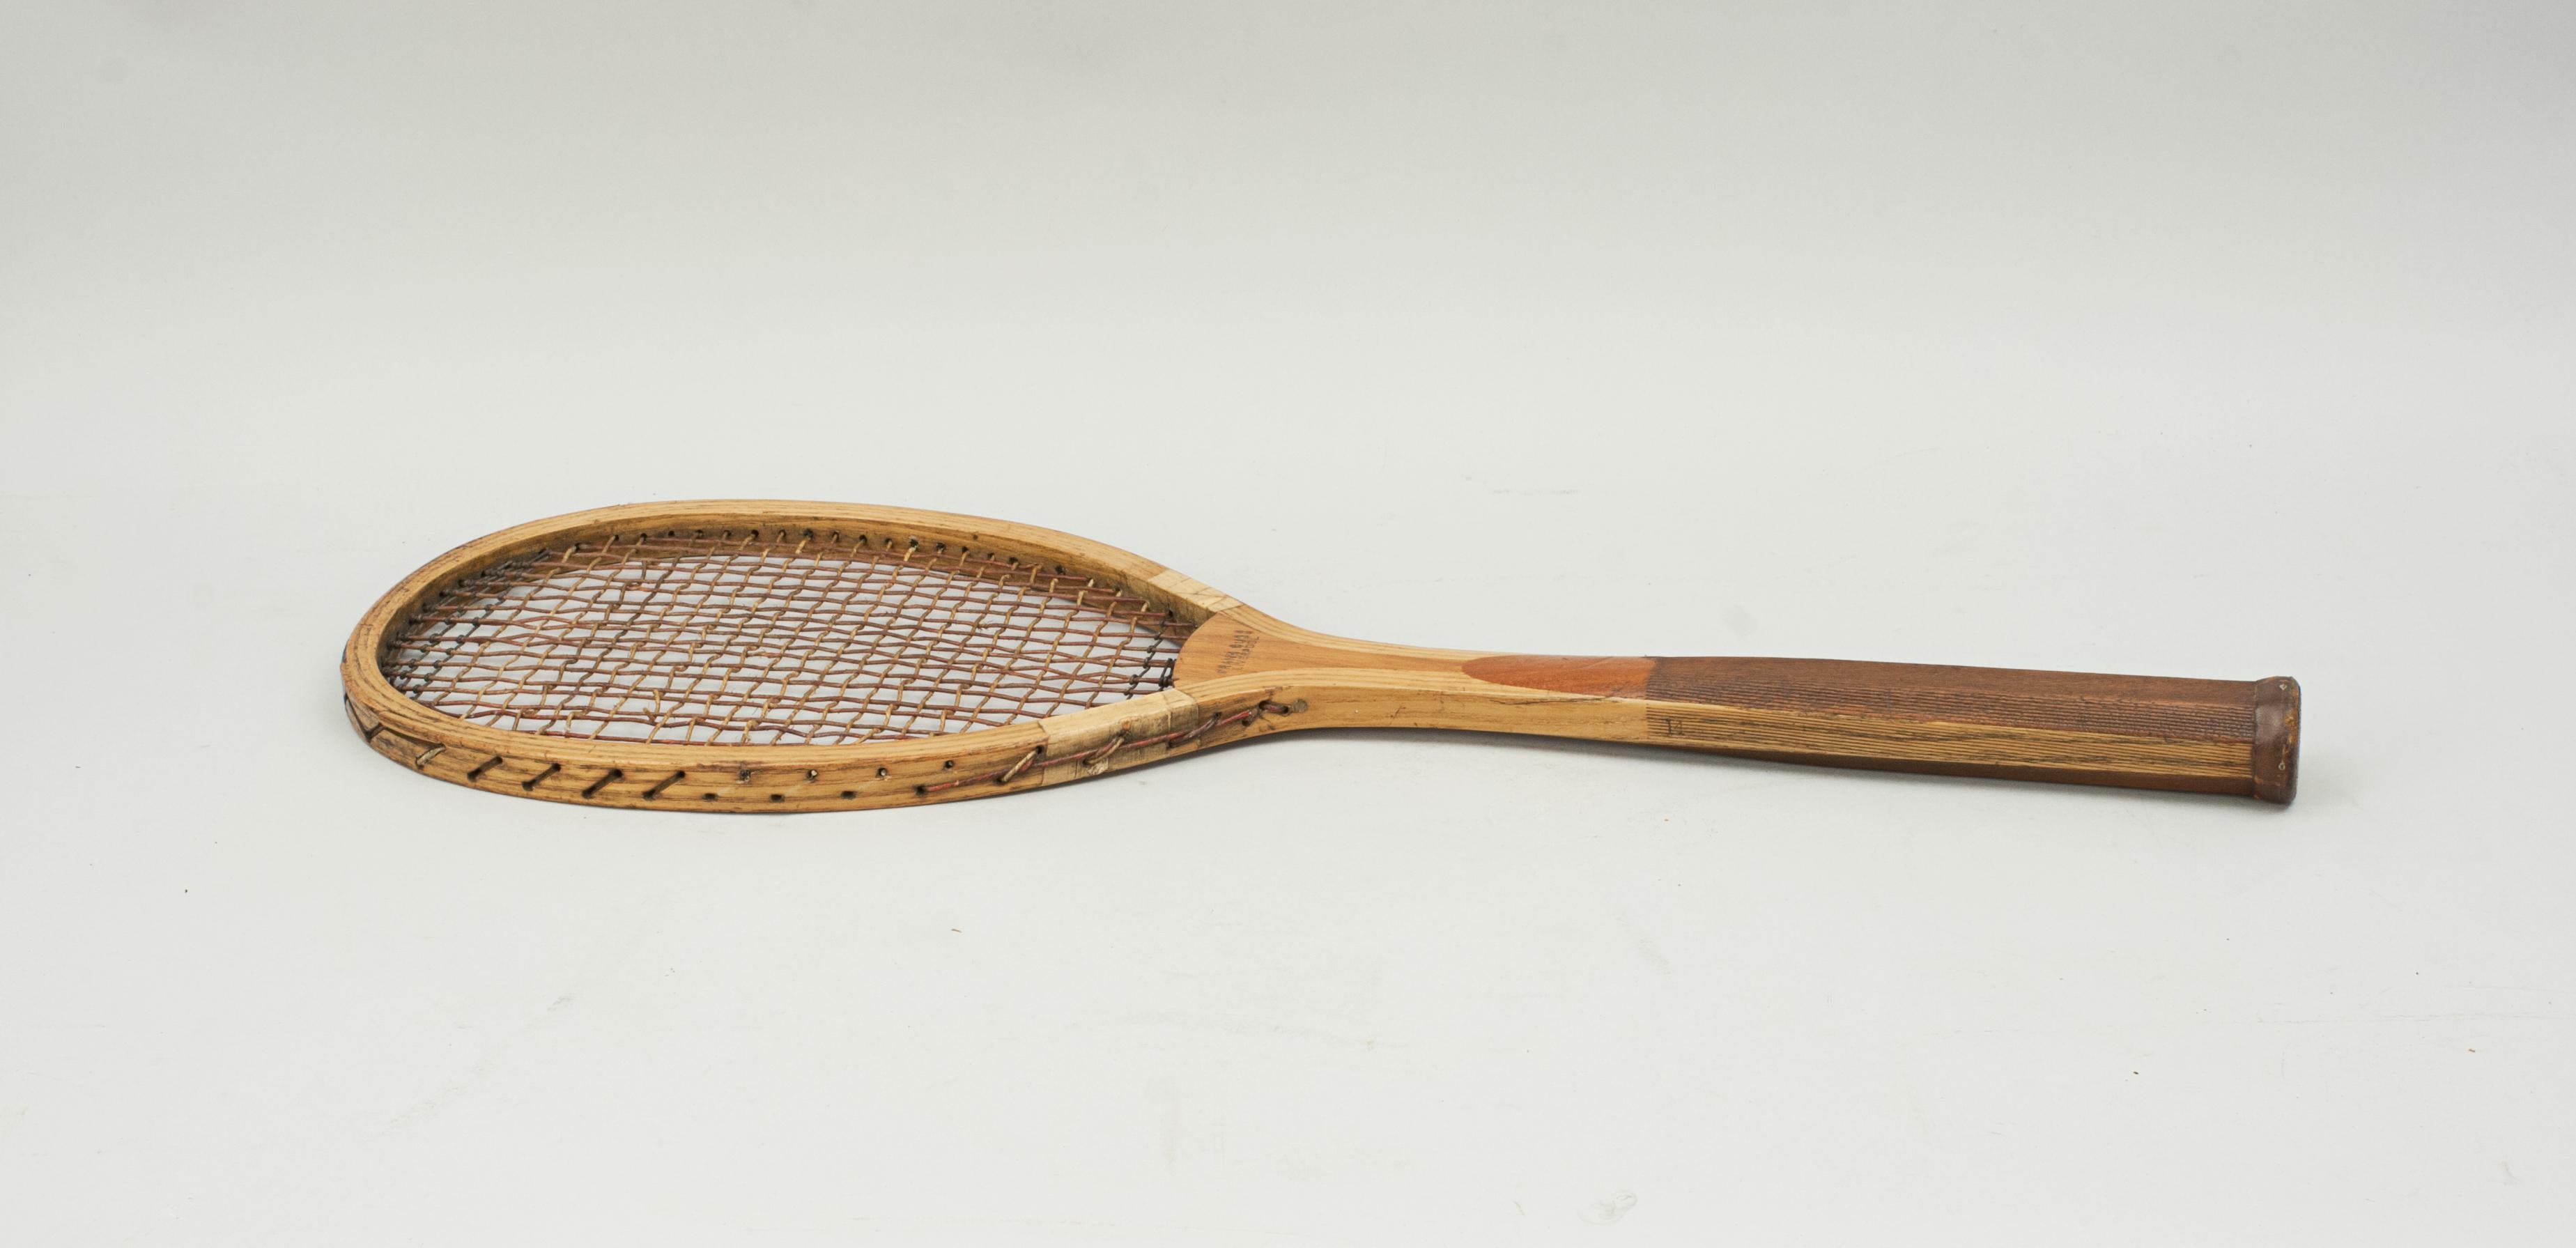 Sporting Art Antique Lawn Tennis Racket, Frank Sugg, Liverpool For Sale